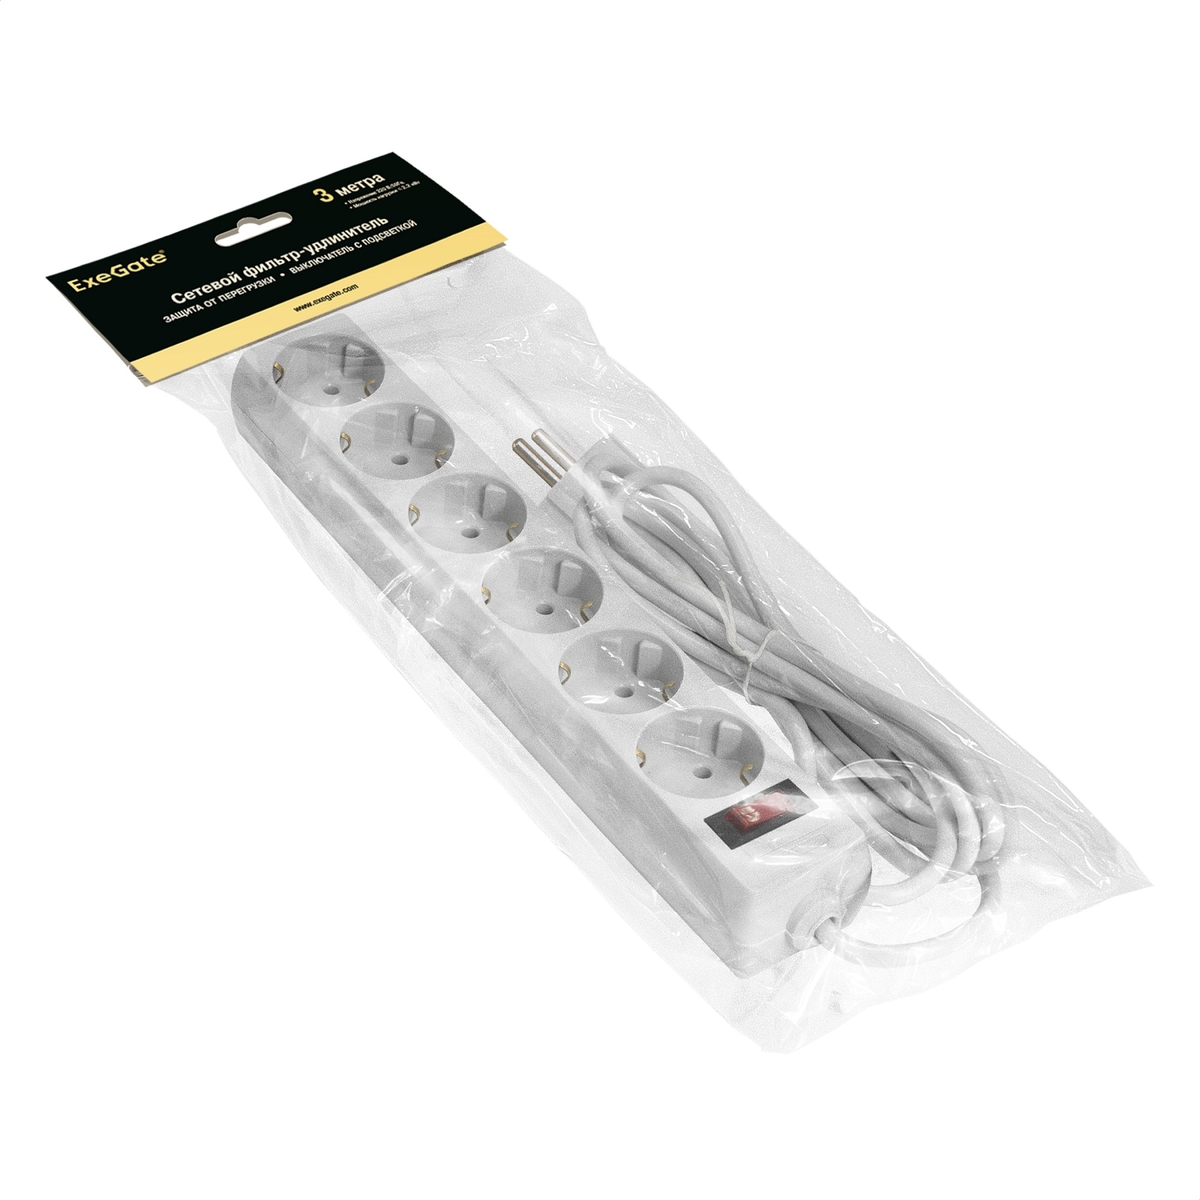 Surge protector ExeGate SP-6-3W